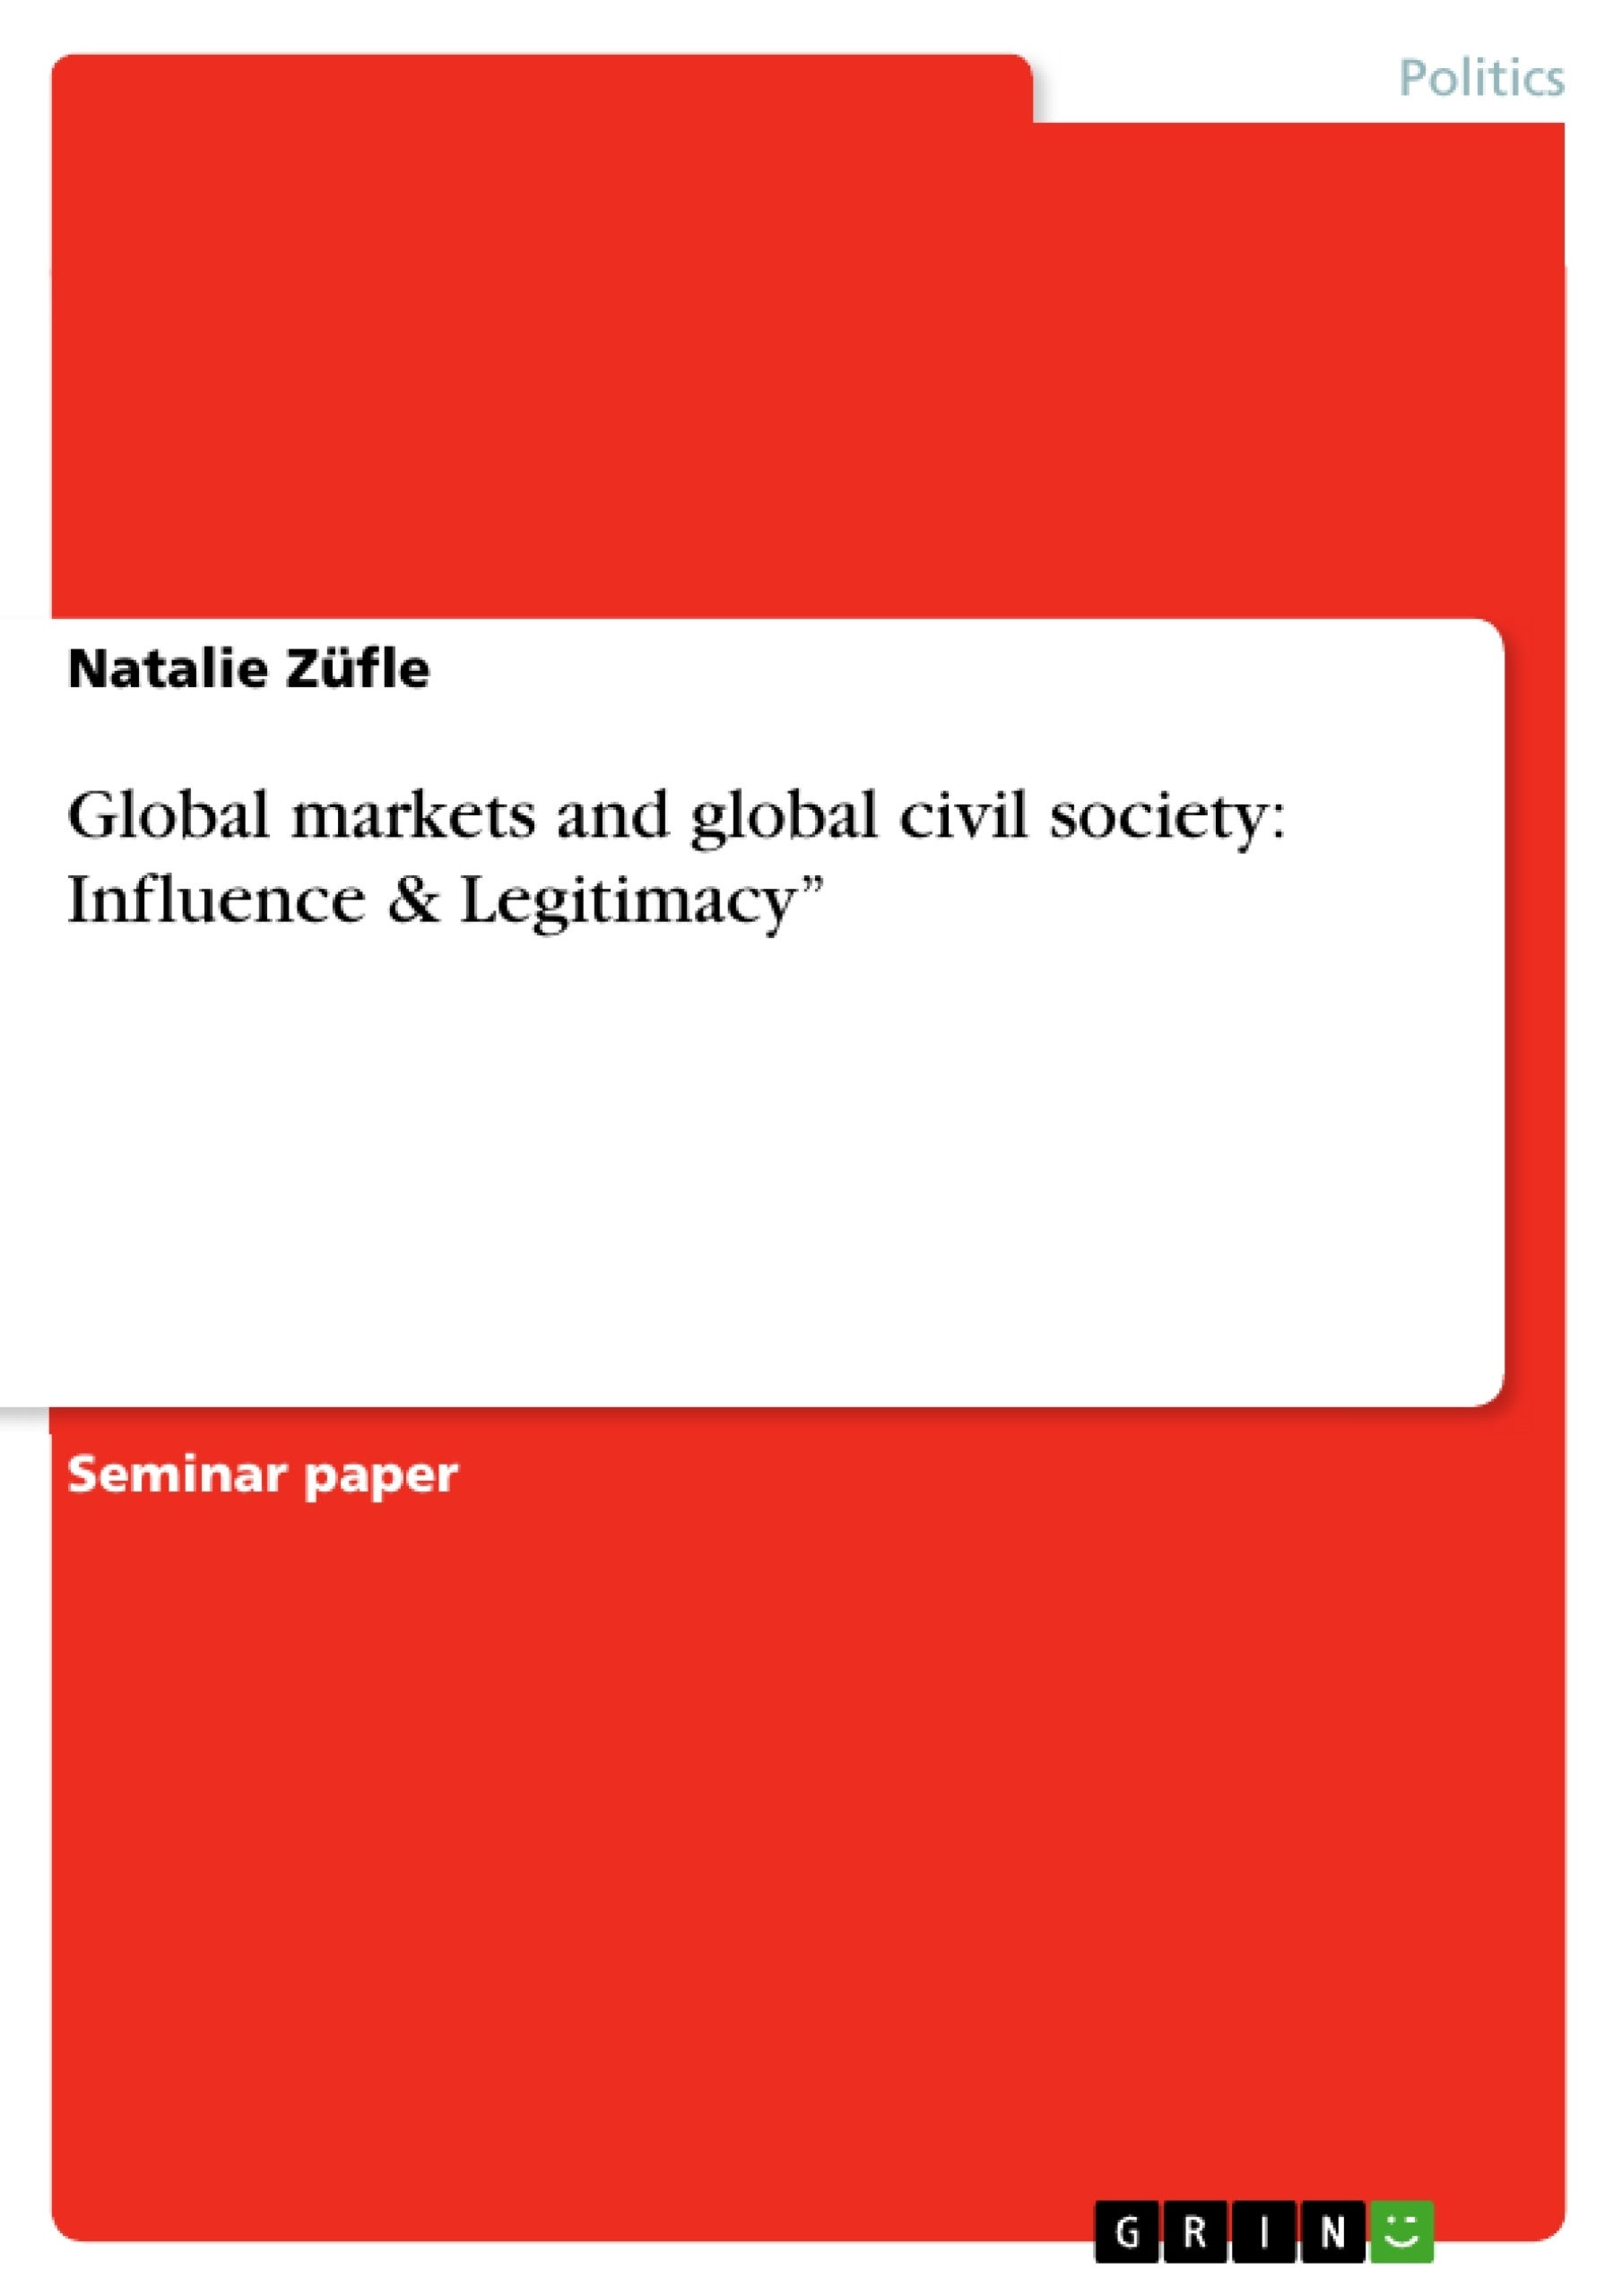 Title: Global markets and global civil society: Influence & Legitimacy”